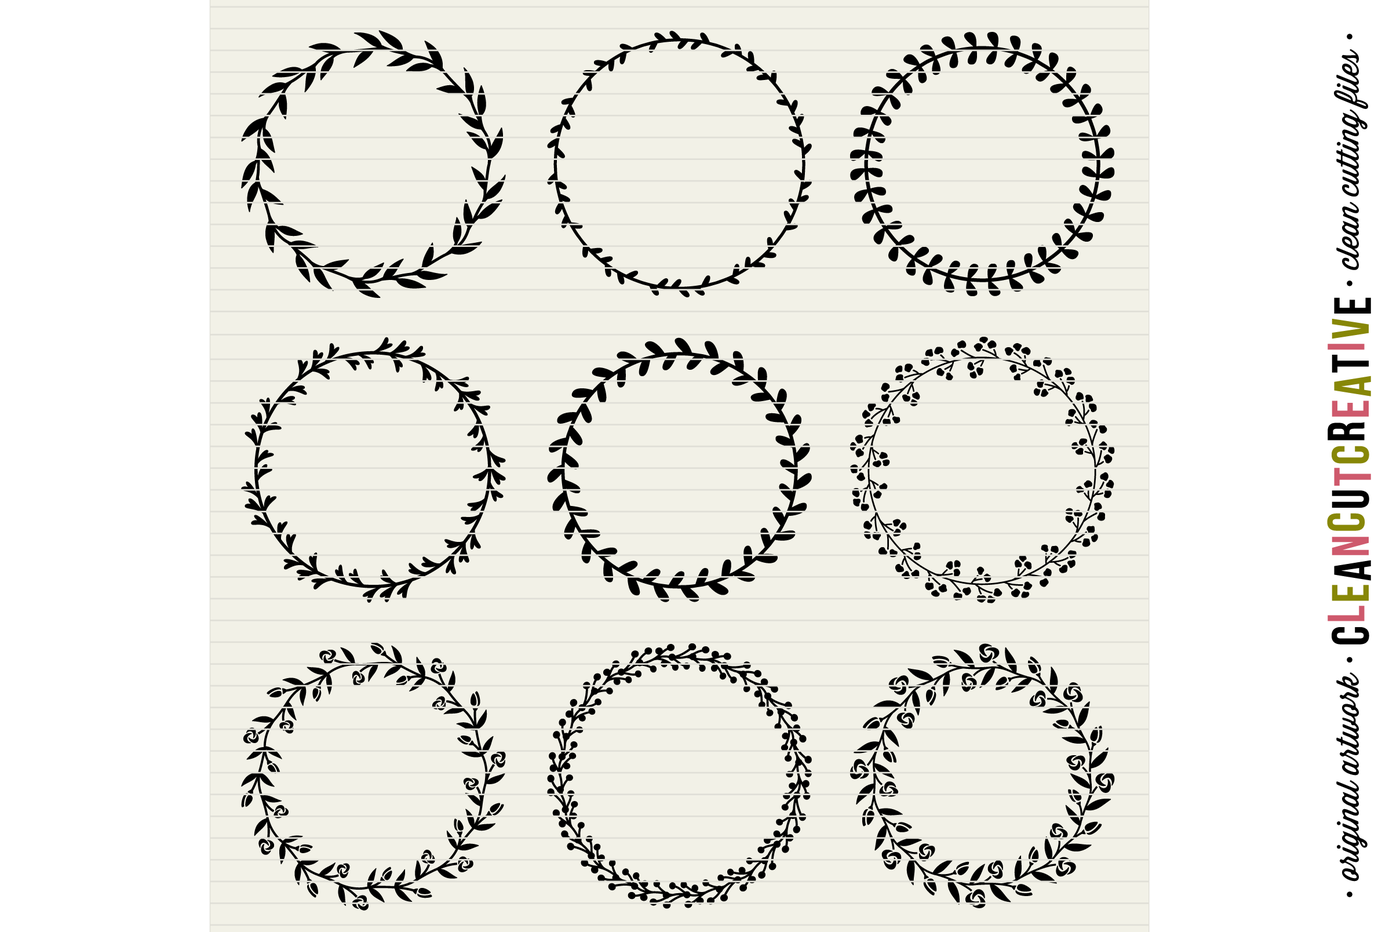 Download 15 Svg Floral Wreaths Floral Leaf Circle Frames Svg Dxf Eps Png Cricut Silhouette Clean Cutting Files By Cleancutcreative Thehungryjpeg Com